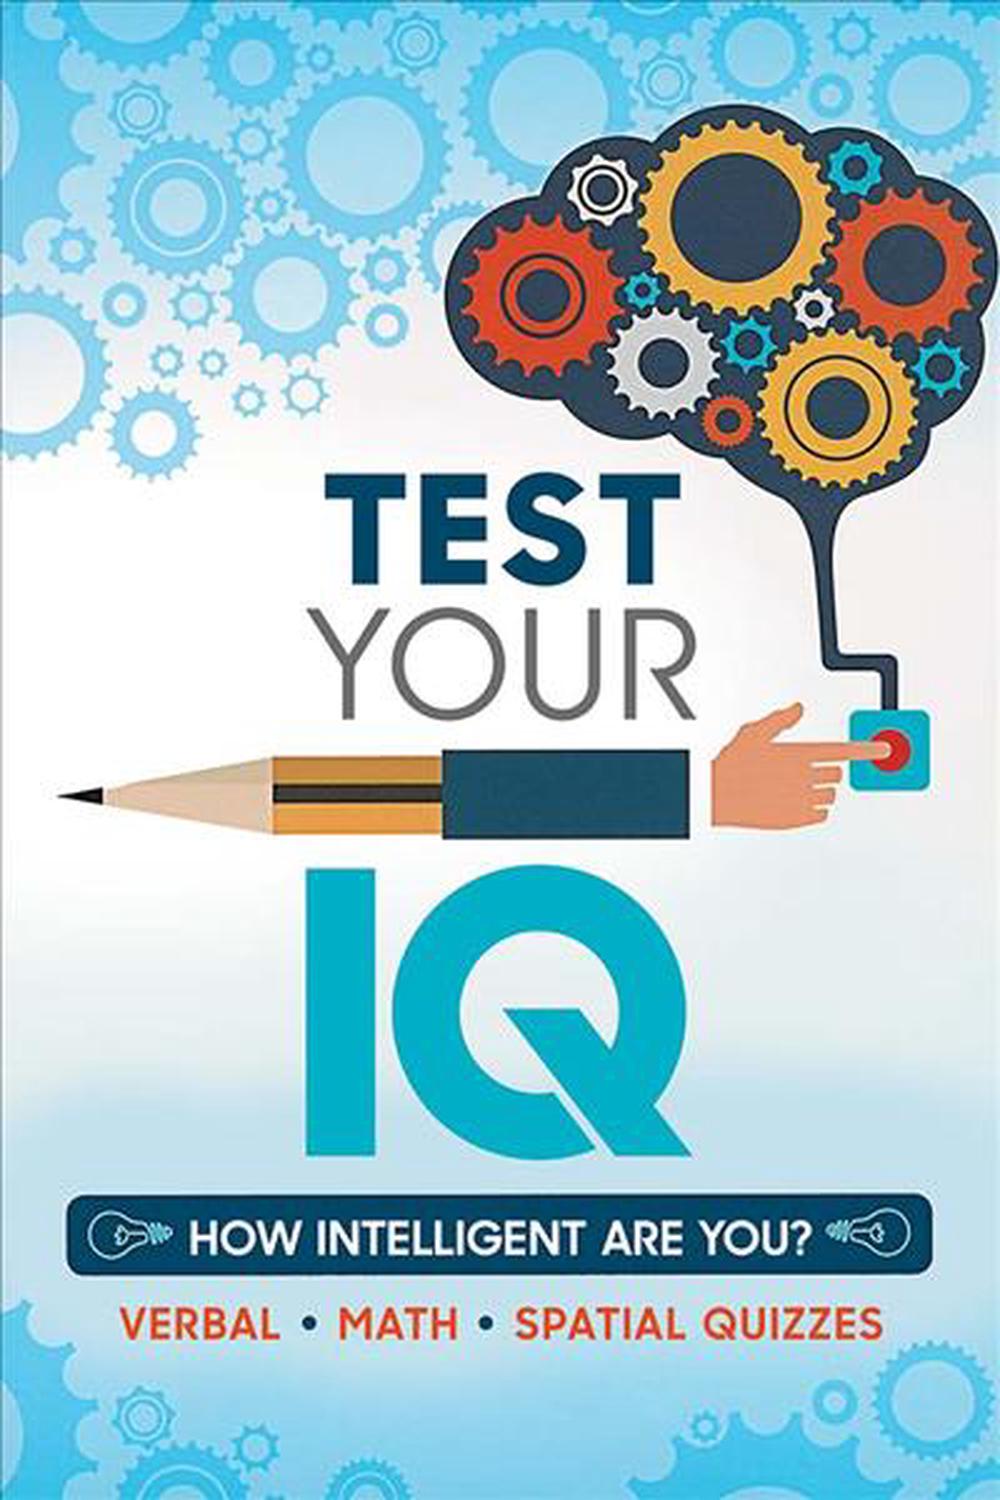 Test Your IQ by 0 Dover Publications (English) Paperback Book Free ...